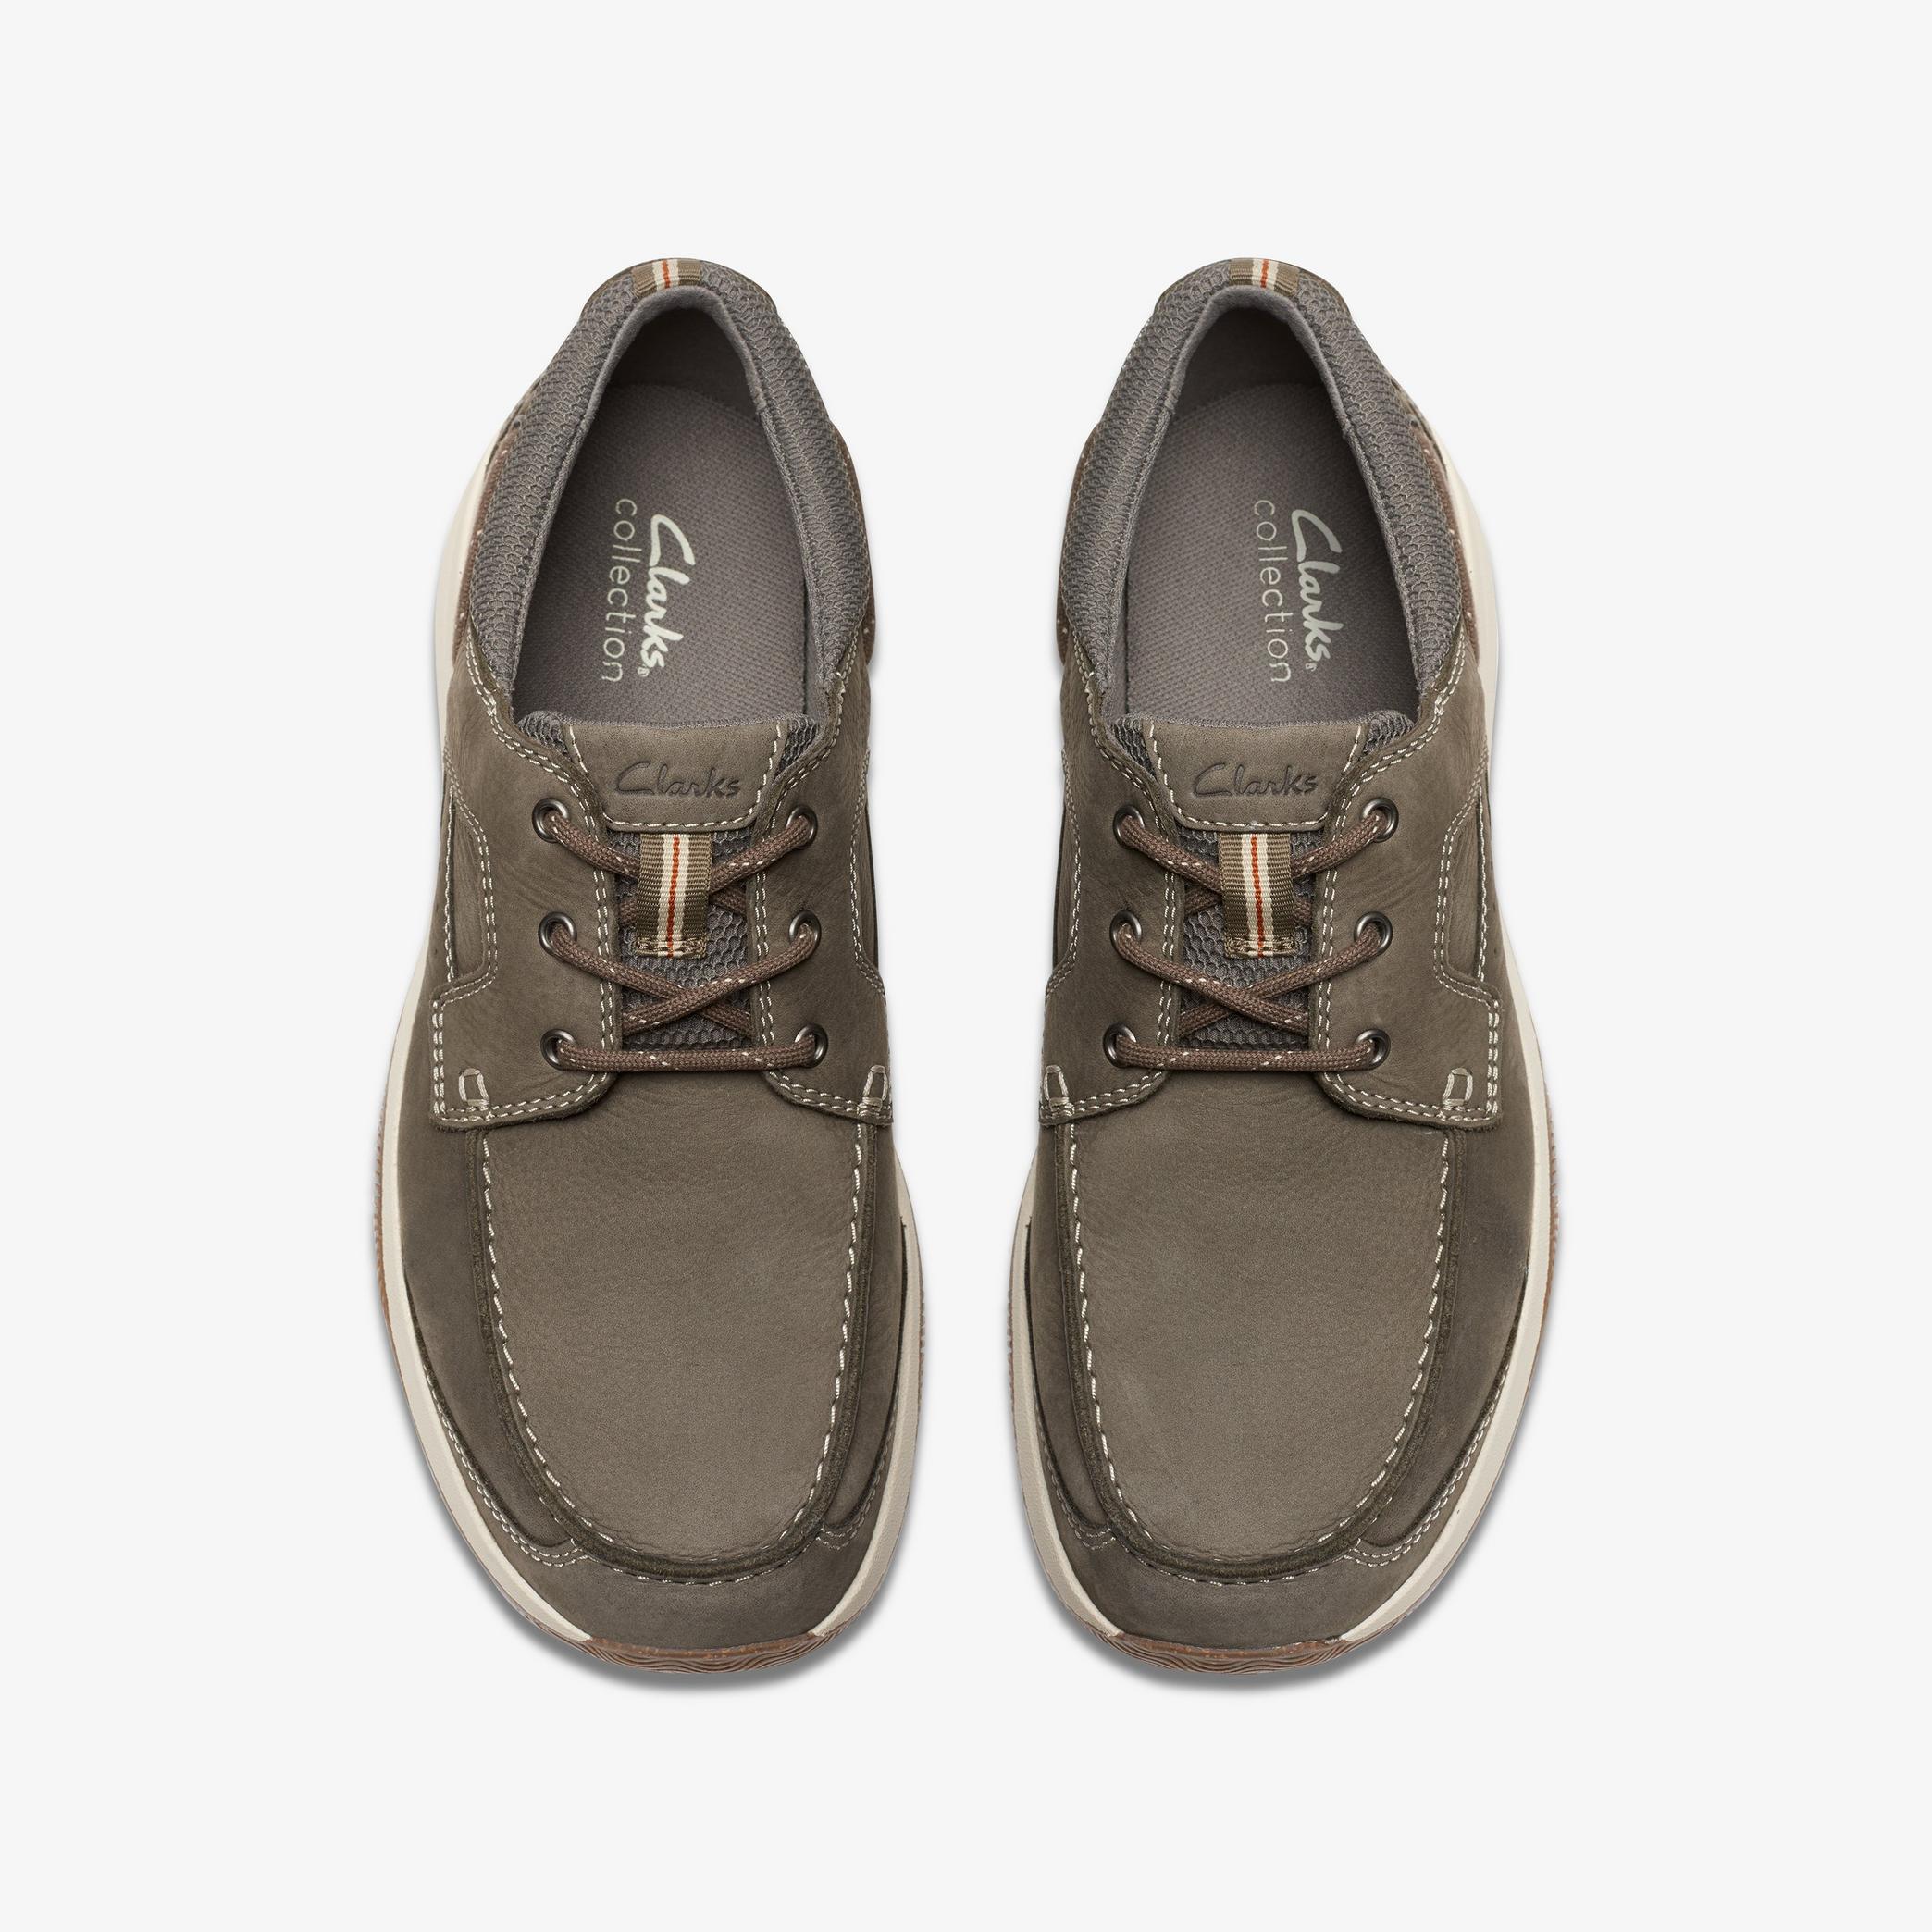 Sailview Lace Taupe Nubuck Boat Shoes, view 7 of 8